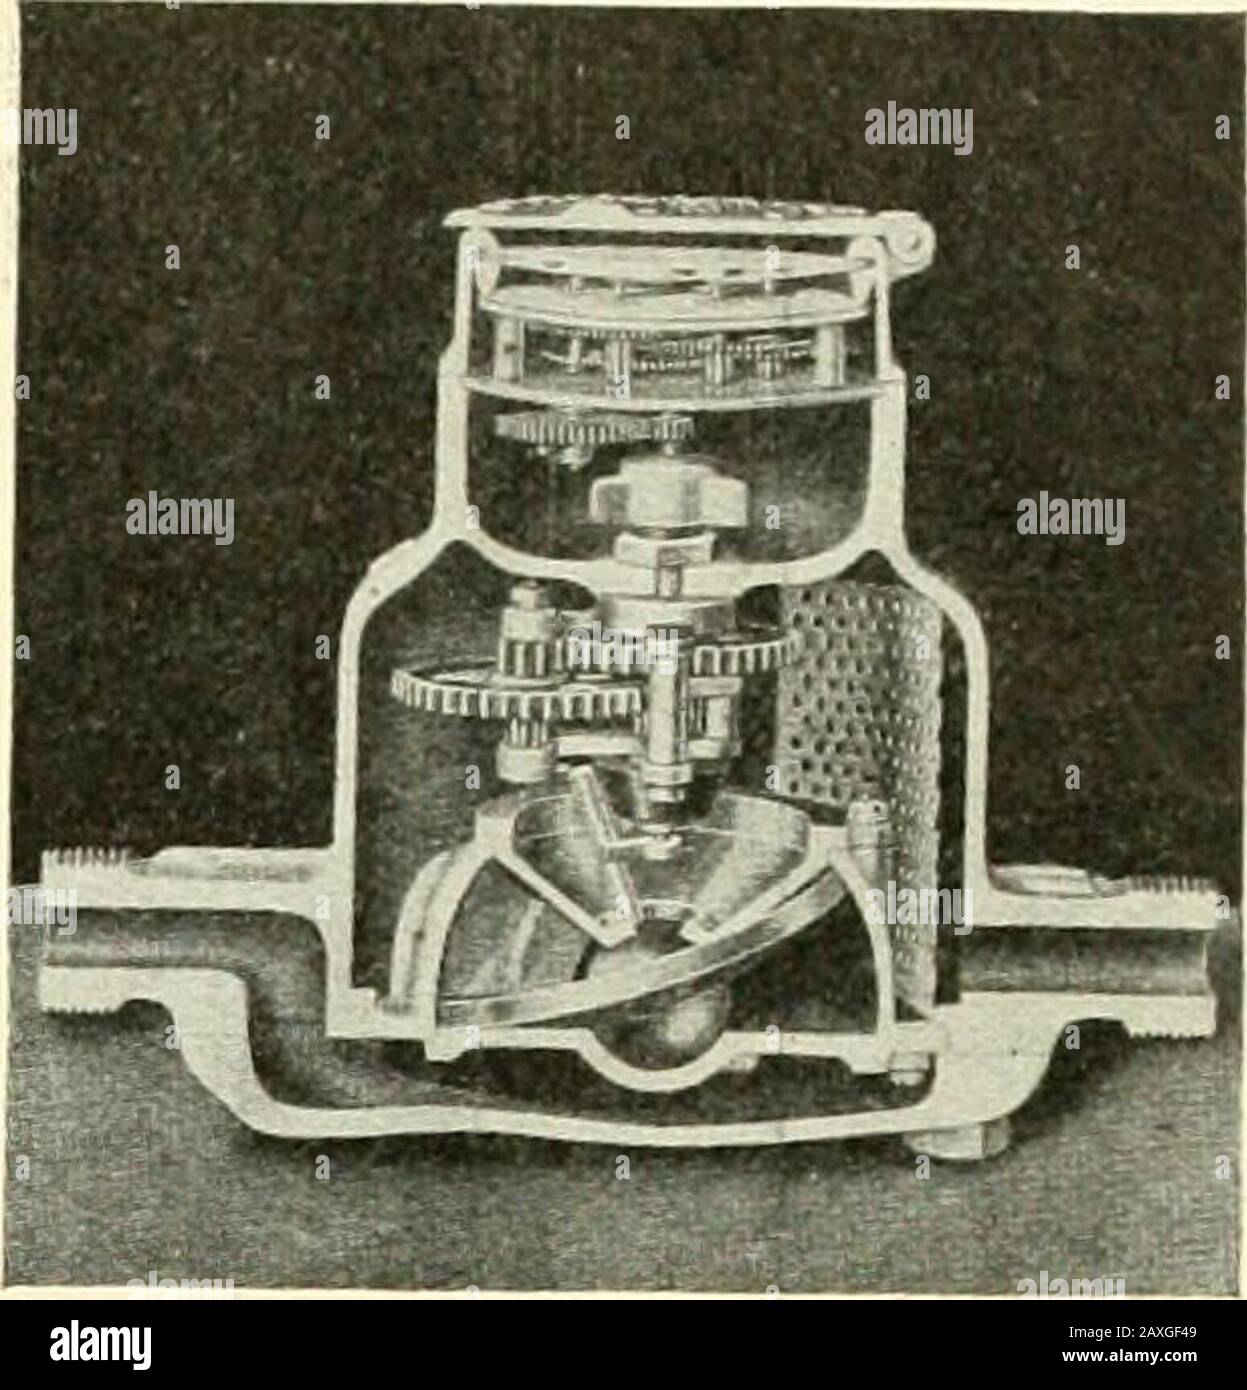 Engineering and Contracting . eter, Illustrating Various Positions of  Ring-Shaped Piston. position of the piston with respect to the-inletand  outlet ports in the bottom. At the instant?shown, water enters the chambers  E